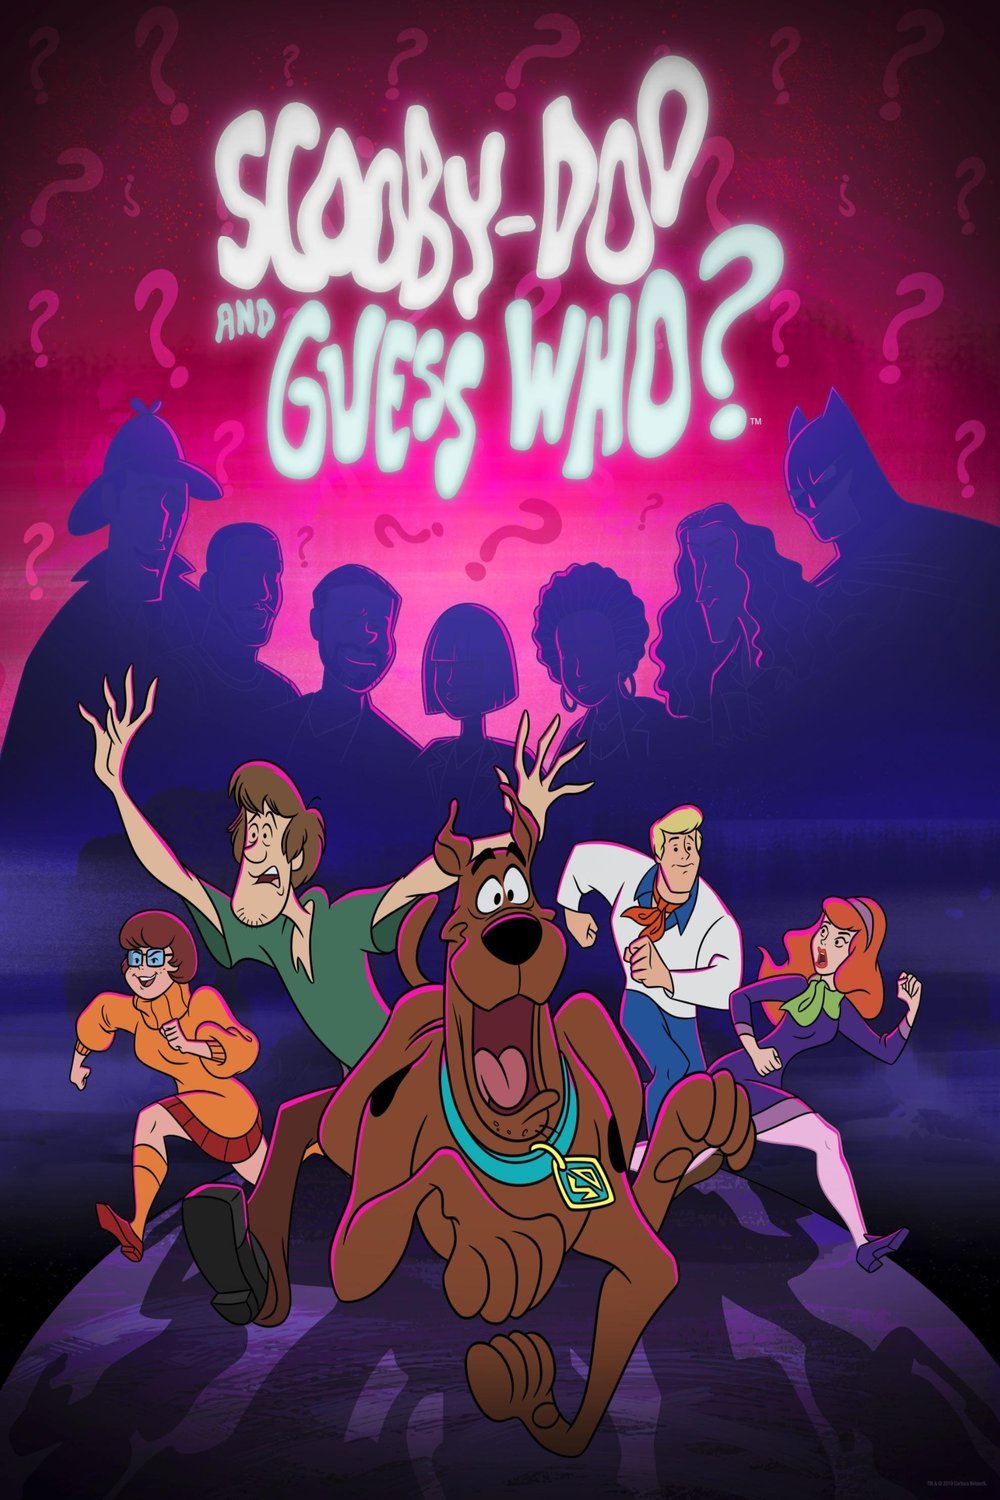 Poster of the movie Scooby-Doo and Guess Who?